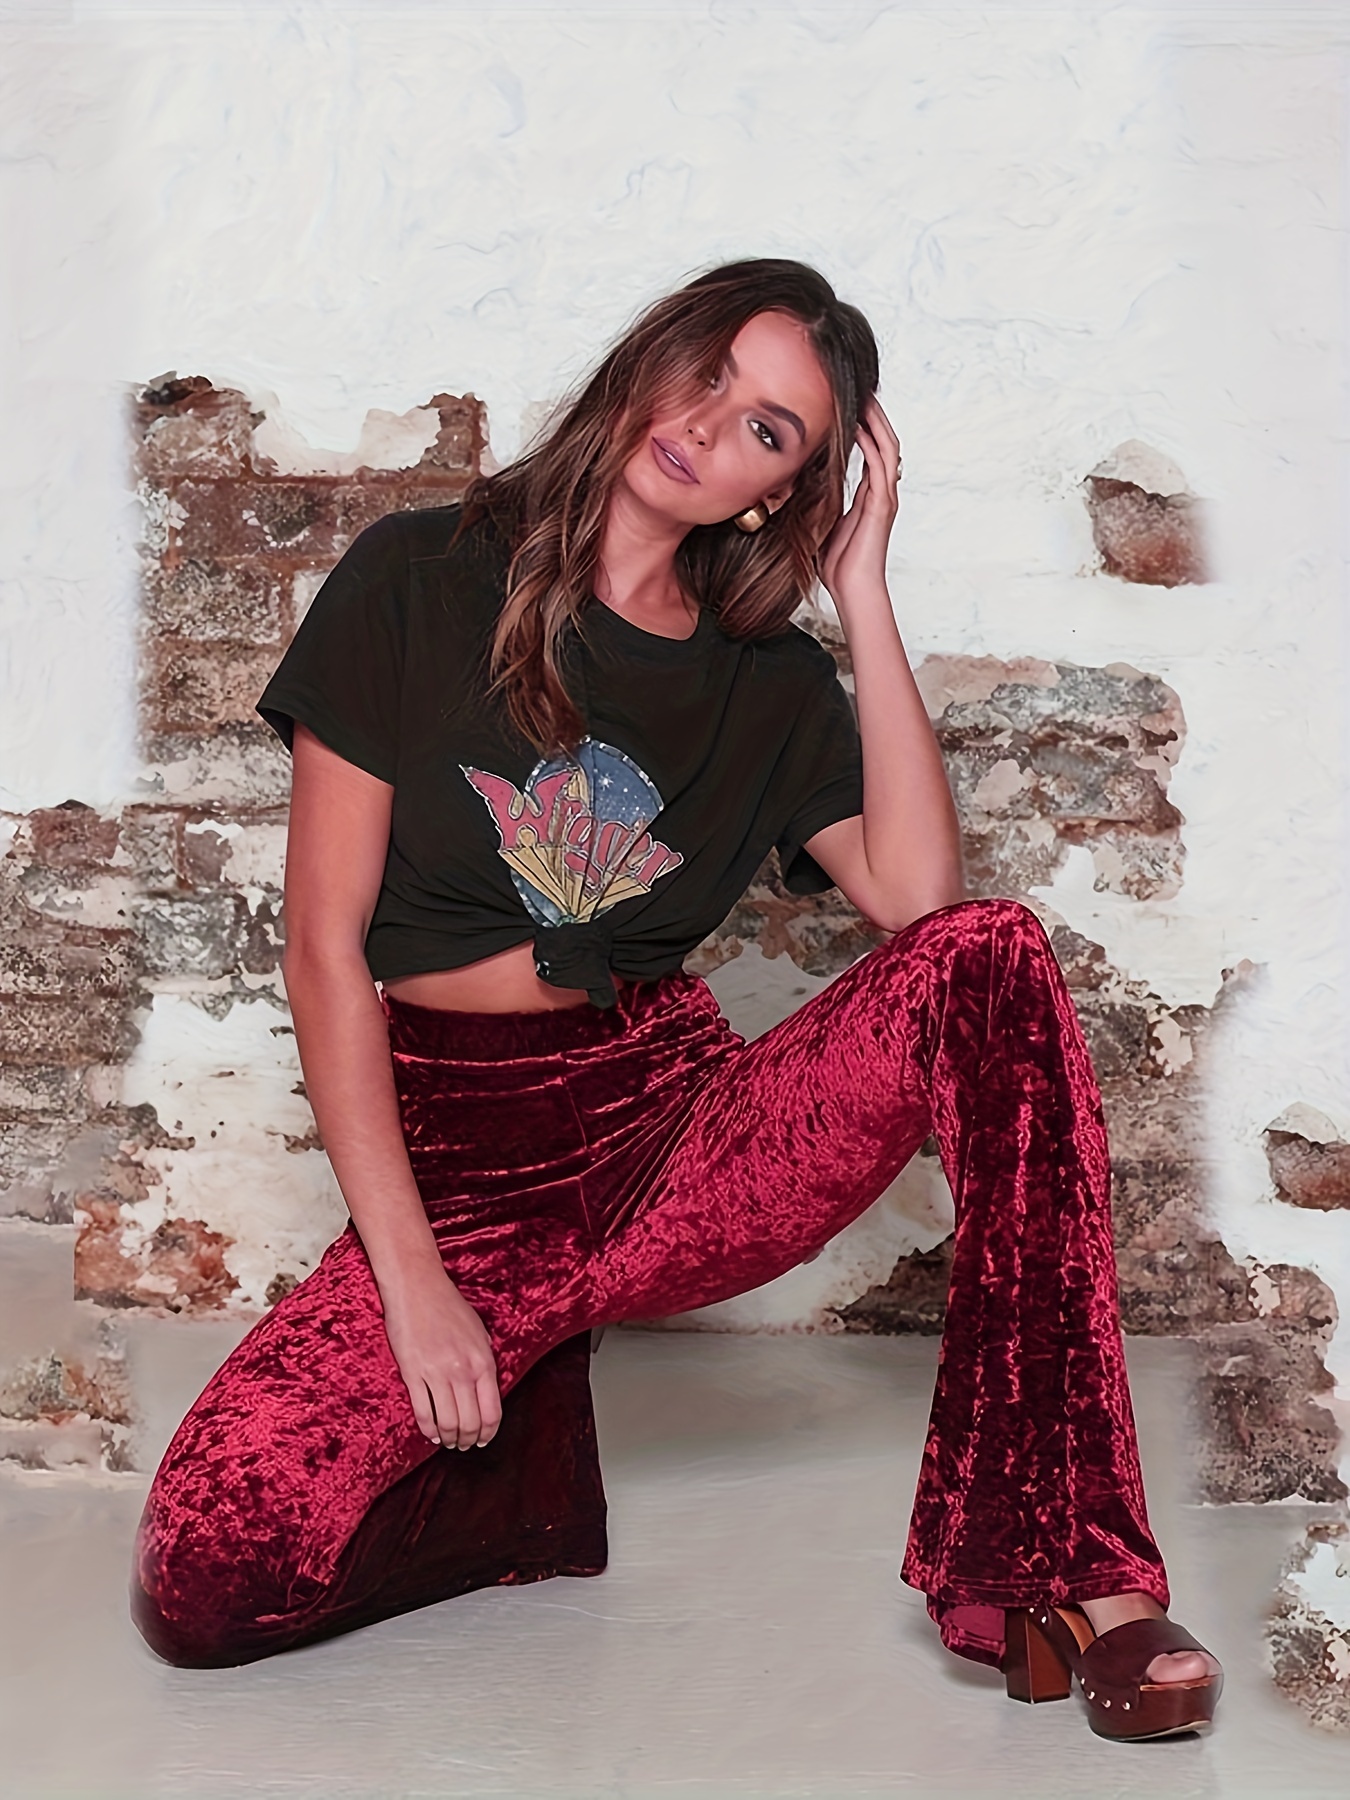 Urban Renewal Vintage Remnants Navy Velvet Flare Trousers  Velvet pants  outfit, Boho chic outfits, Trousers women wide leg